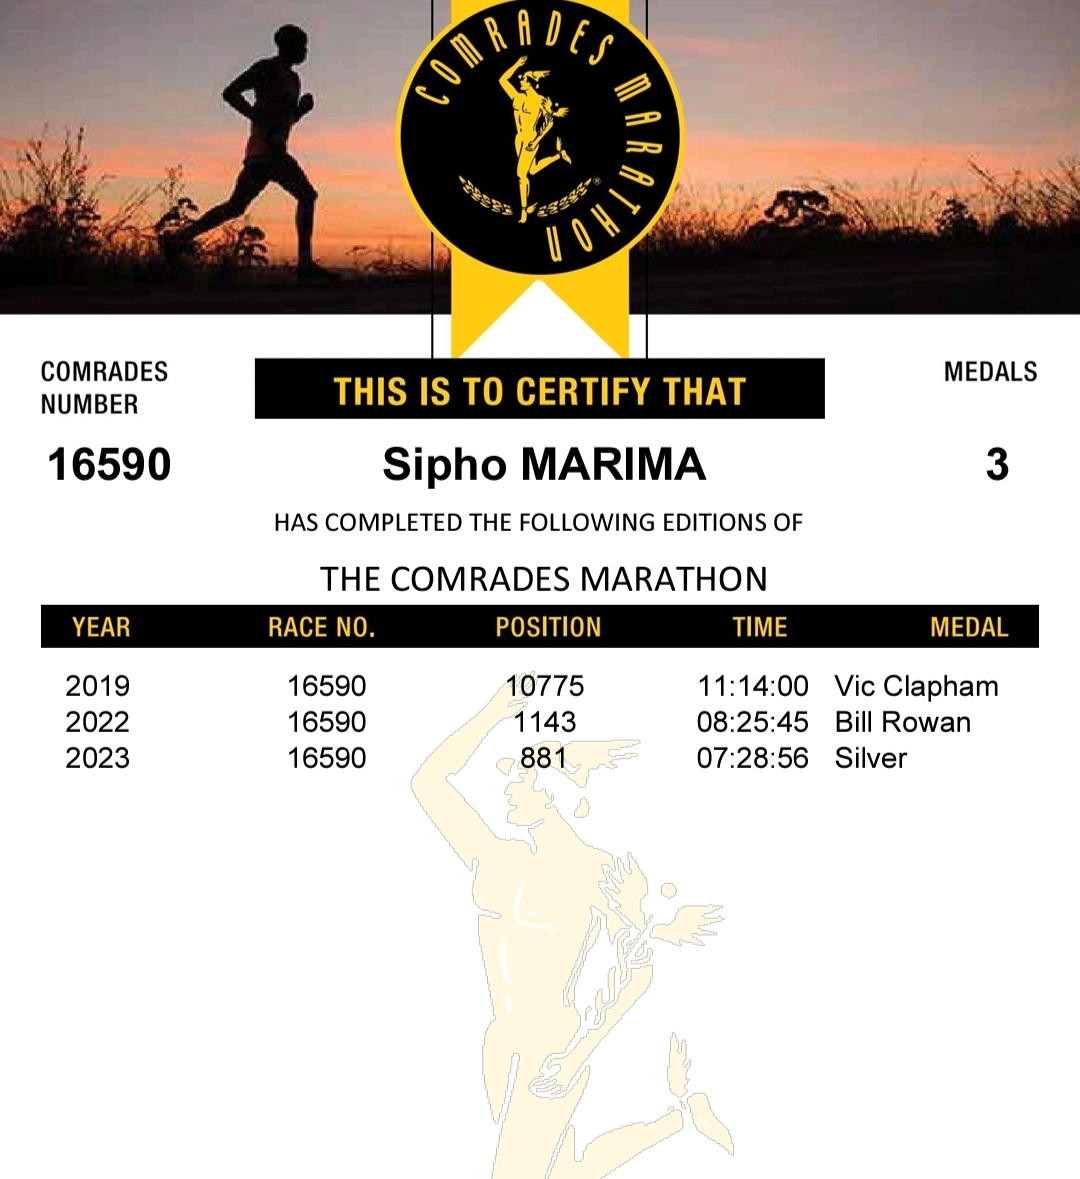 Just under 7 weeks to go before I run my 4th @ComradesRace 🤞🏾 Today I resumed my training after 8 days of rest 👌🏽 The last time I ran Comrades Marathon up run was in 2019 and I did it in 11:14:00⌚️That was my first Comrades check frame 3️⃣